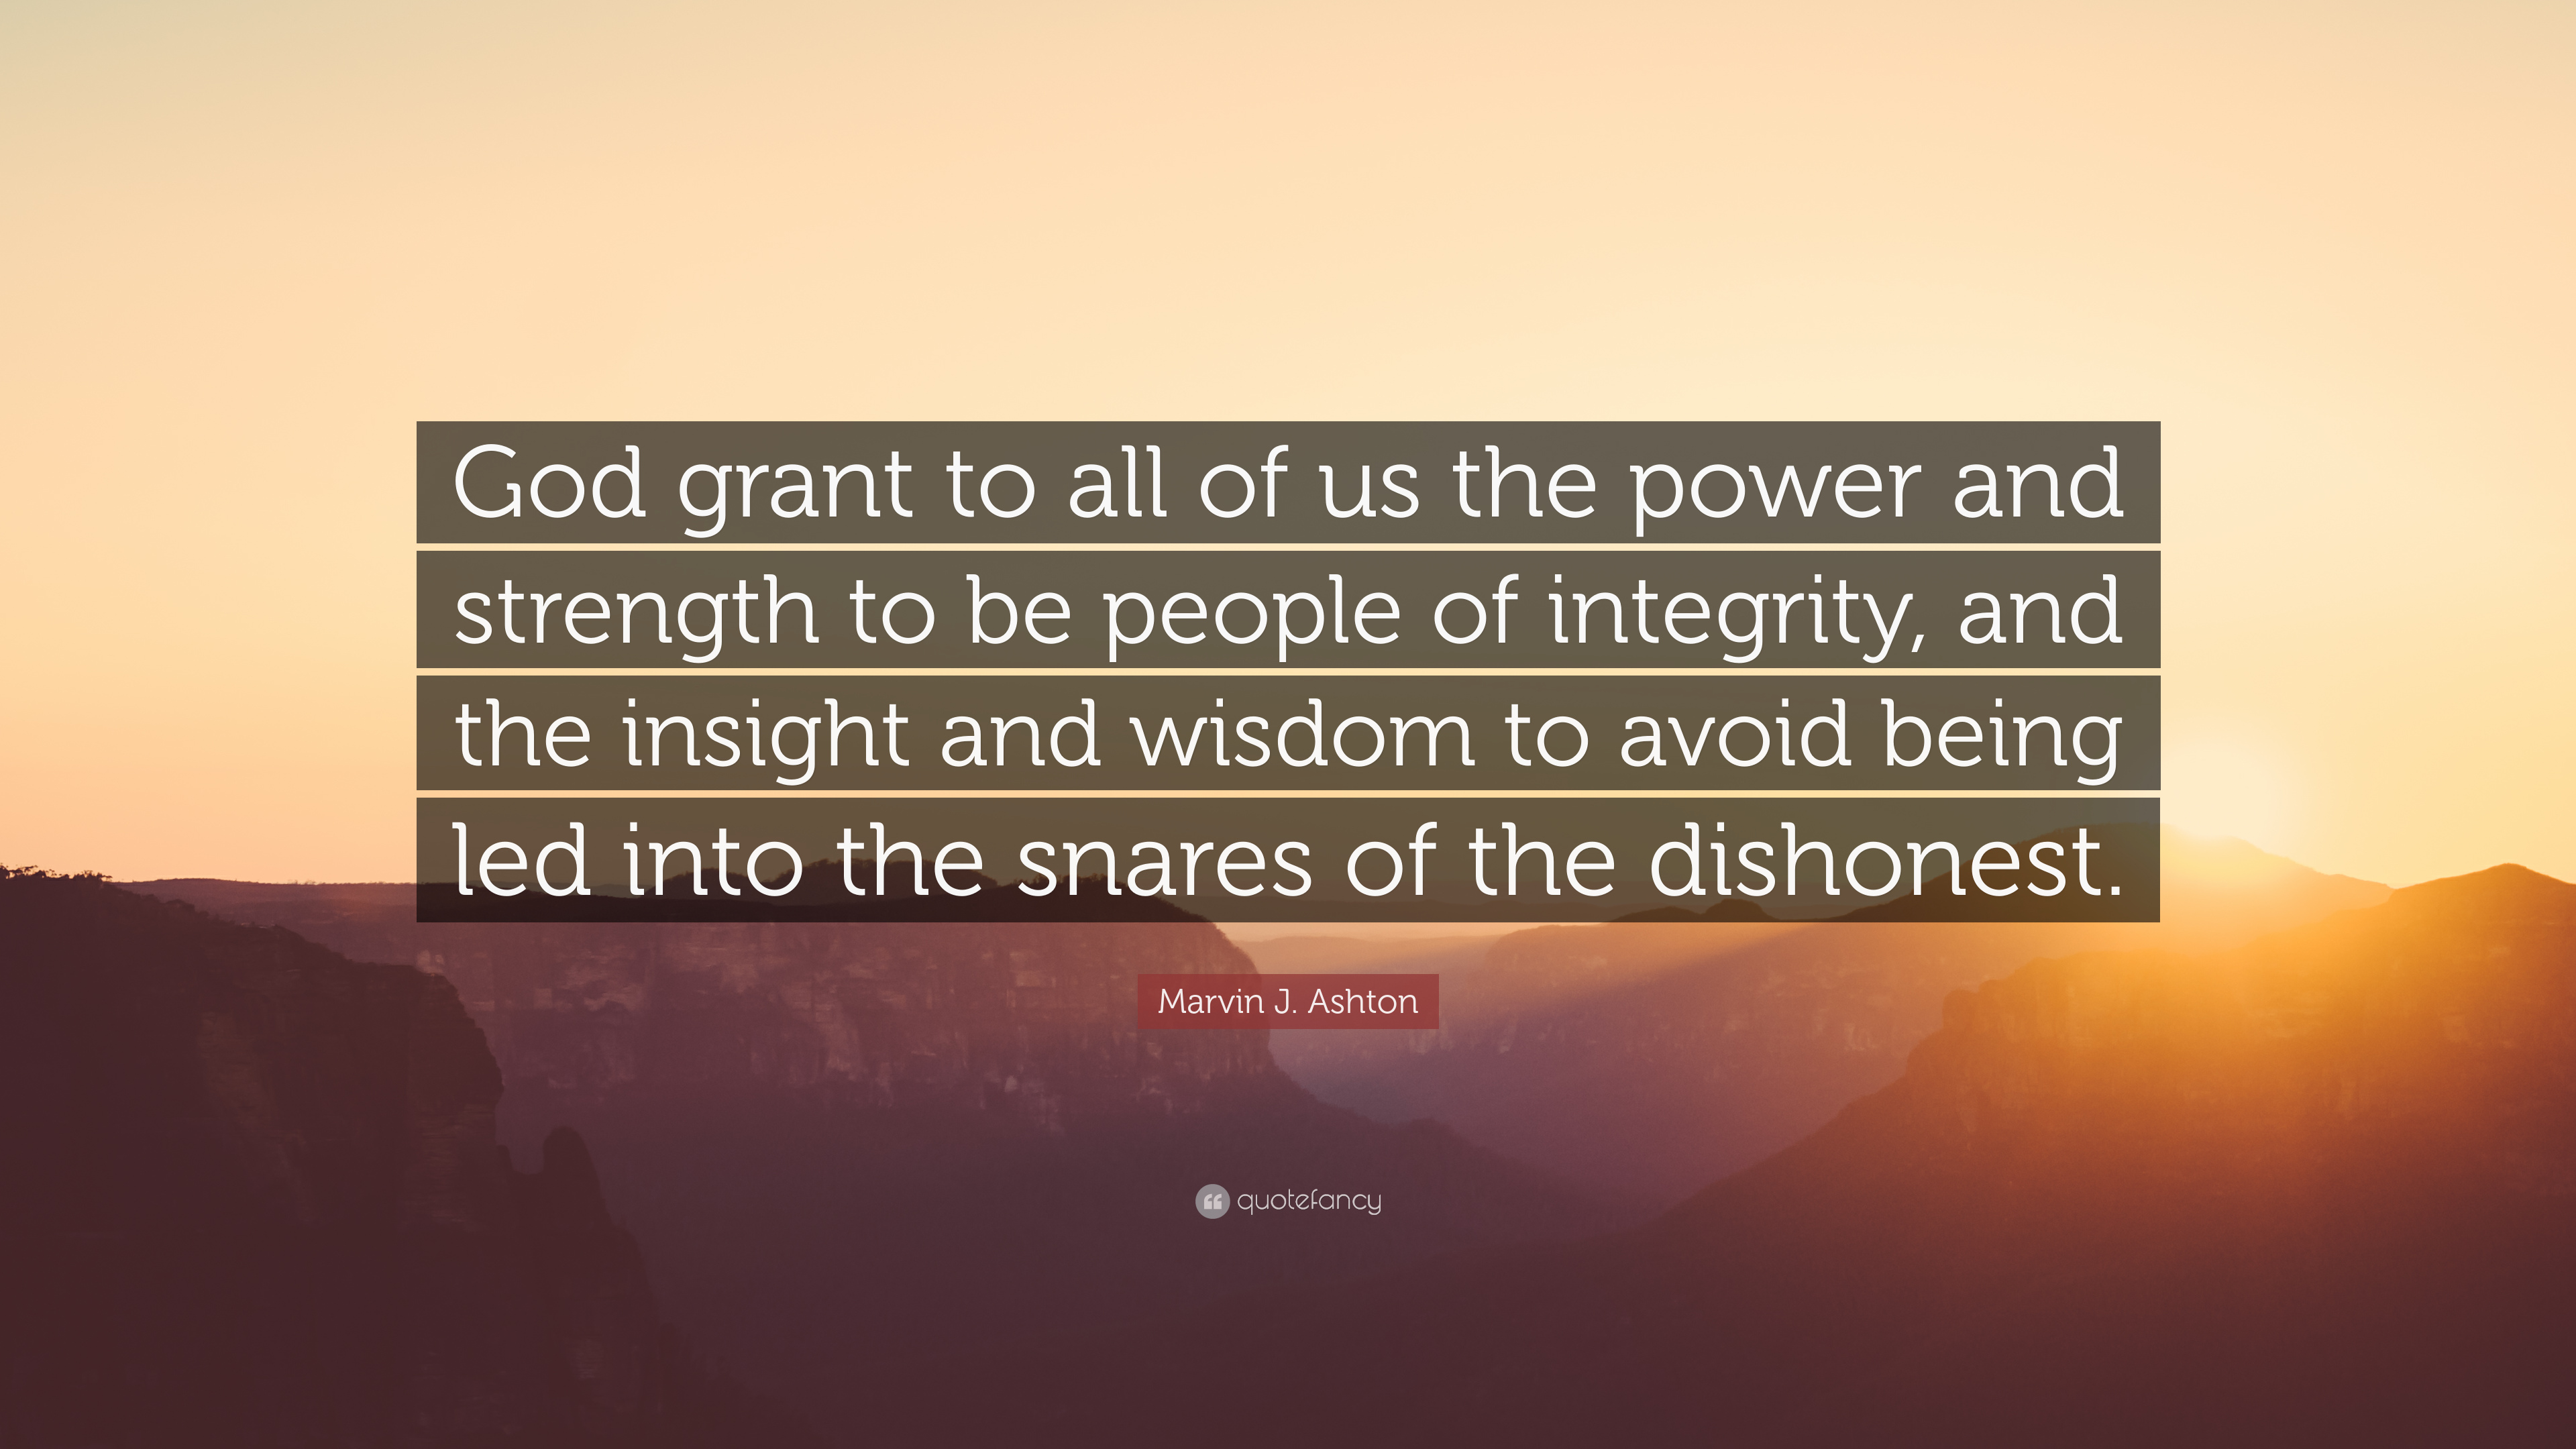 Marvin J. Ashton Quote: “God grant to all of us the power and strength to be people of integrity, and the insight and wisdom to avoid being led i.”